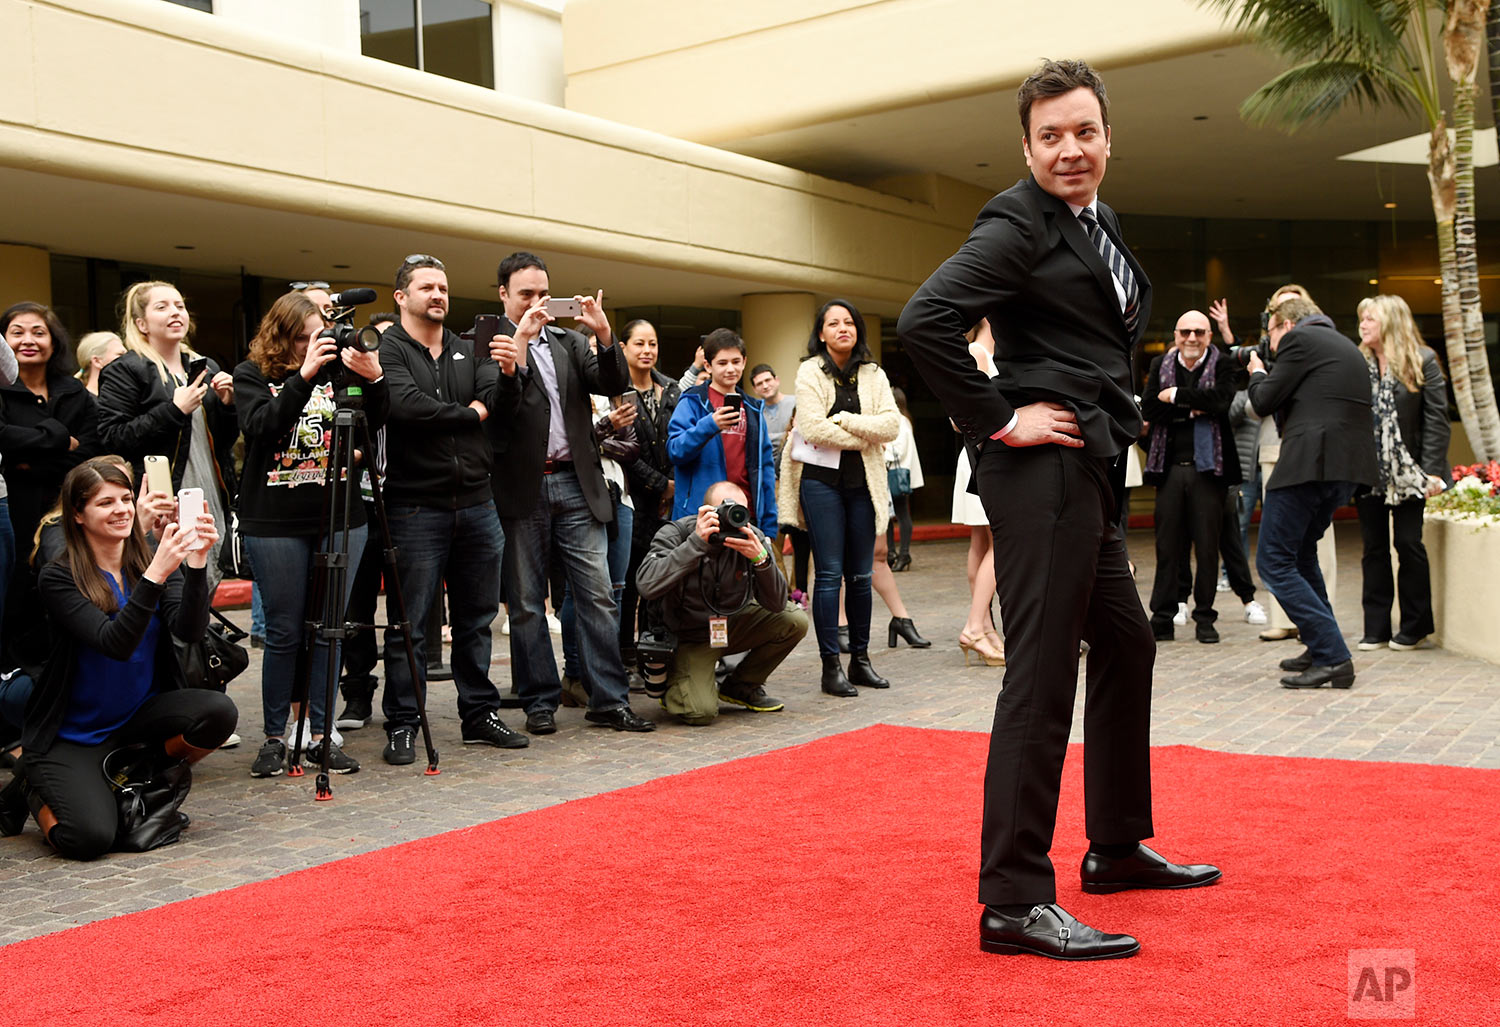  Jimmy Fallon, host of the 74th Annual Golden Globe Awards, strikes a pose after rolling out the red carpet during Golden Globe Awards Preview Day at the Beverly Hilton on Wednesday, Jan. 4, 2017, in Beverly Hills, Calif. The awards will be held on S